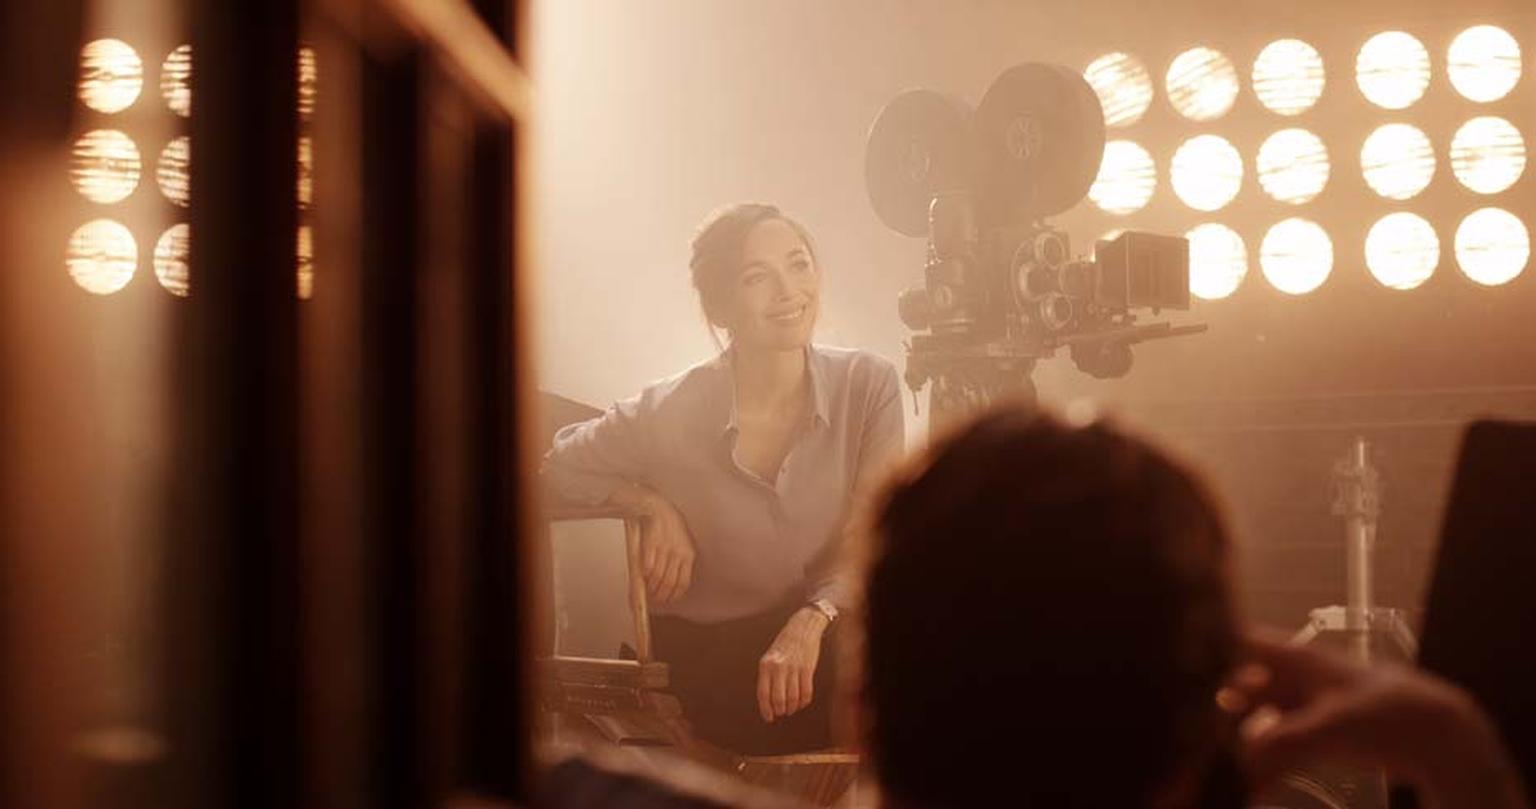 Carmen Chaplin is captivated by a silent movie, possibly starring her grandfather Charlie Chaplin, surrounded by film equipment of his era and lit by the hazy light of studio spotlights during the shoot for Jaeger-LeCoultre's new Open a Whole New World ad